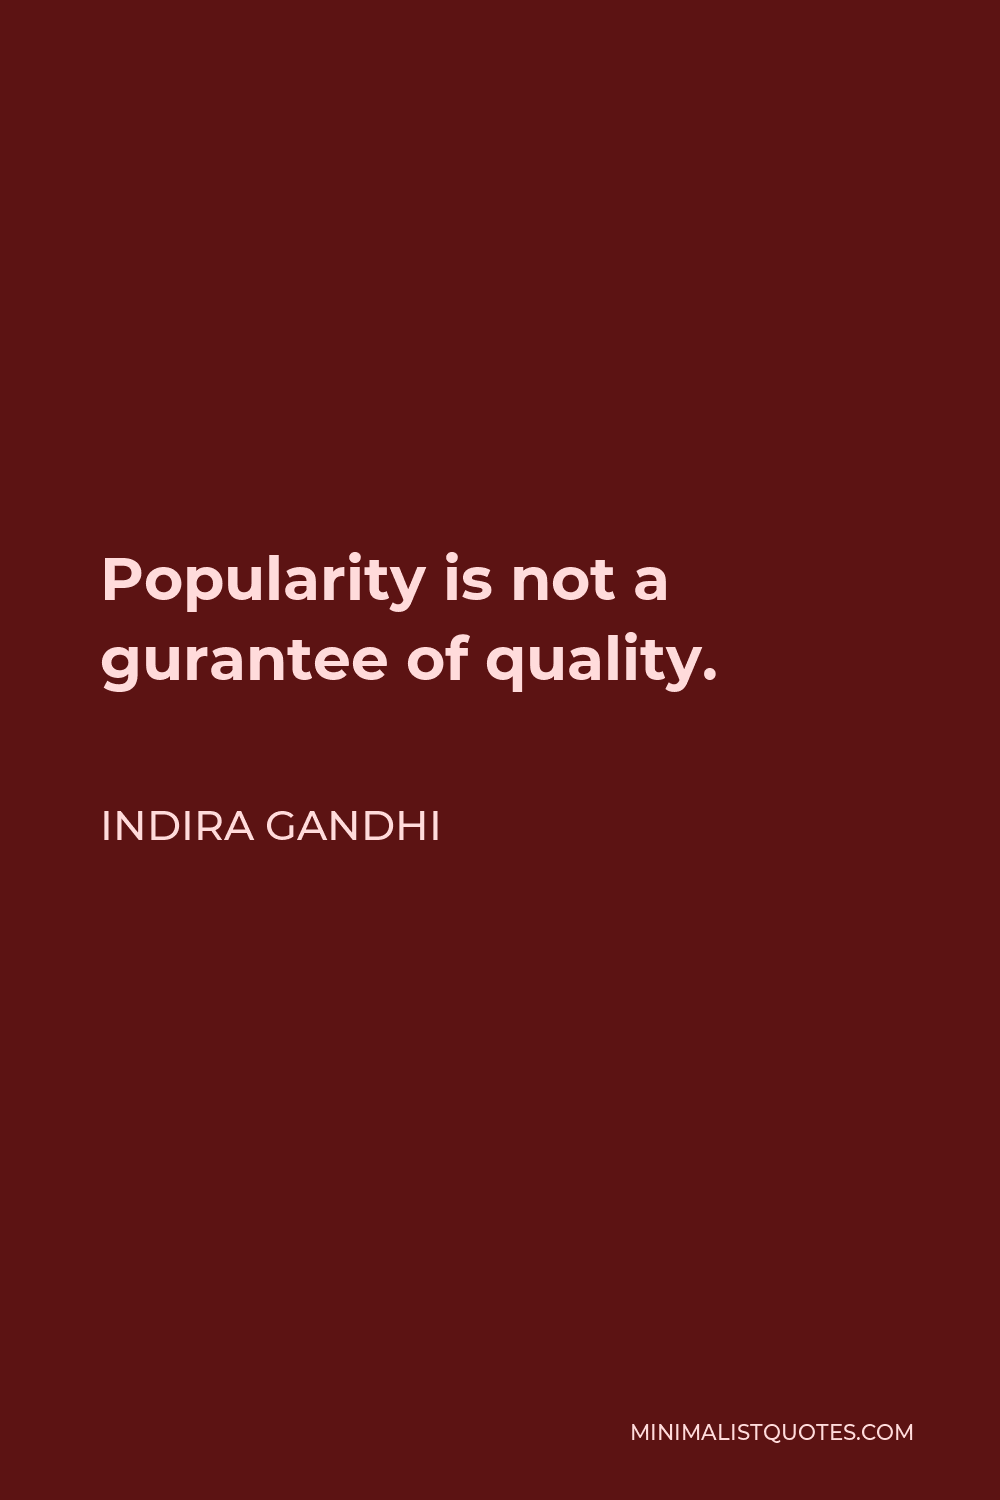 Indira Gandhi Quote - Popularity is not a gurantee of quality.